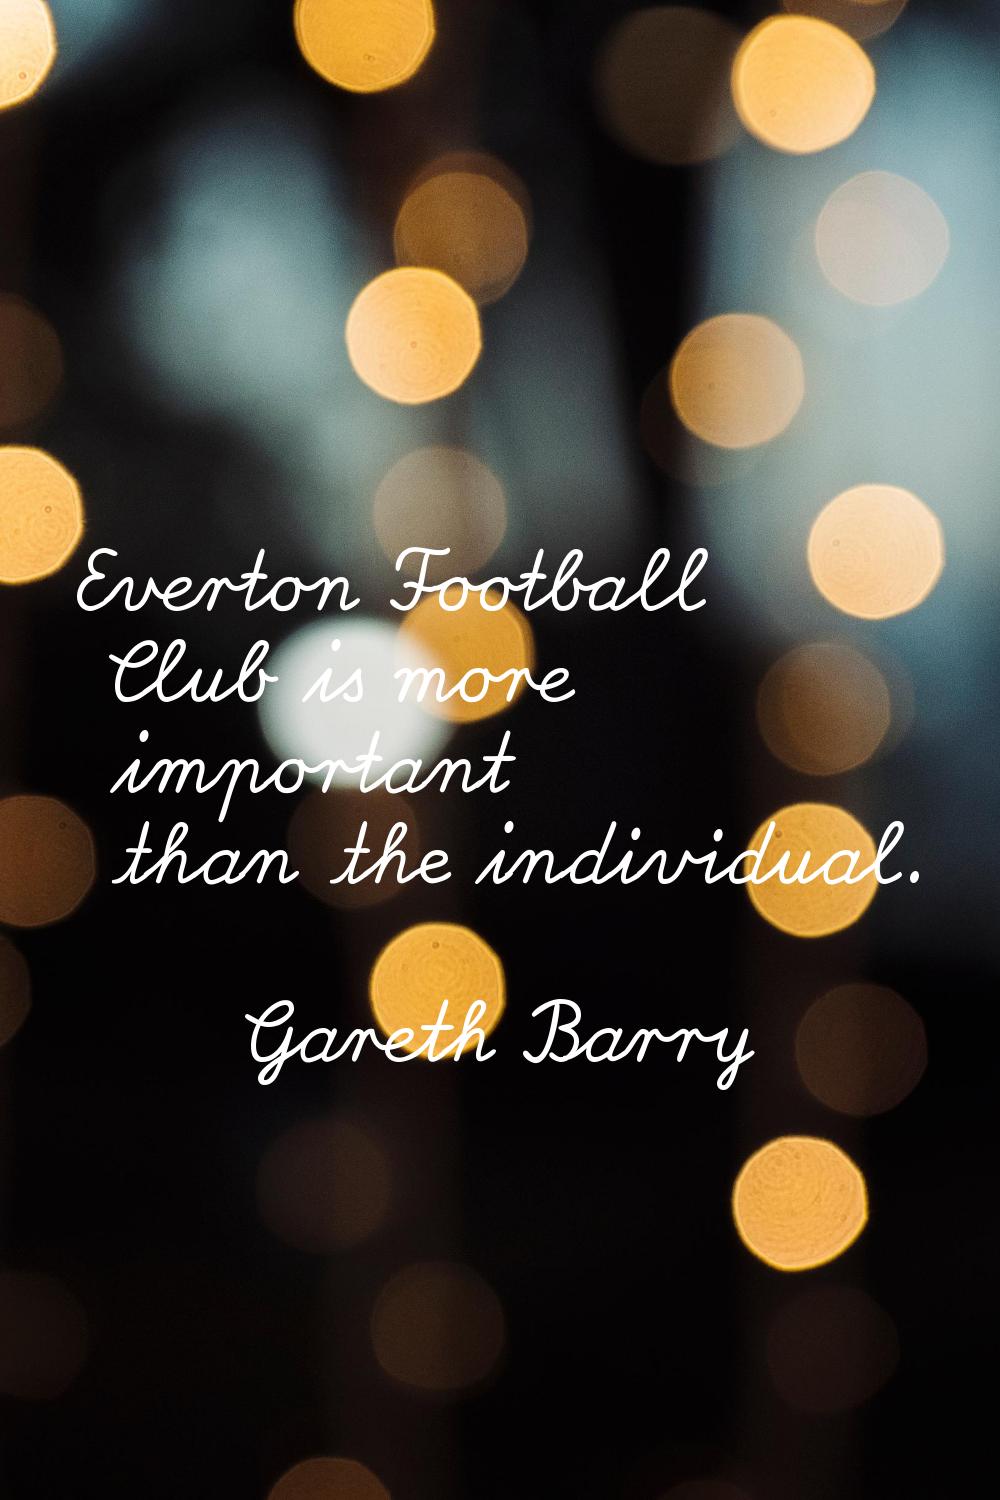 Everton Football Club is more important than the individual.